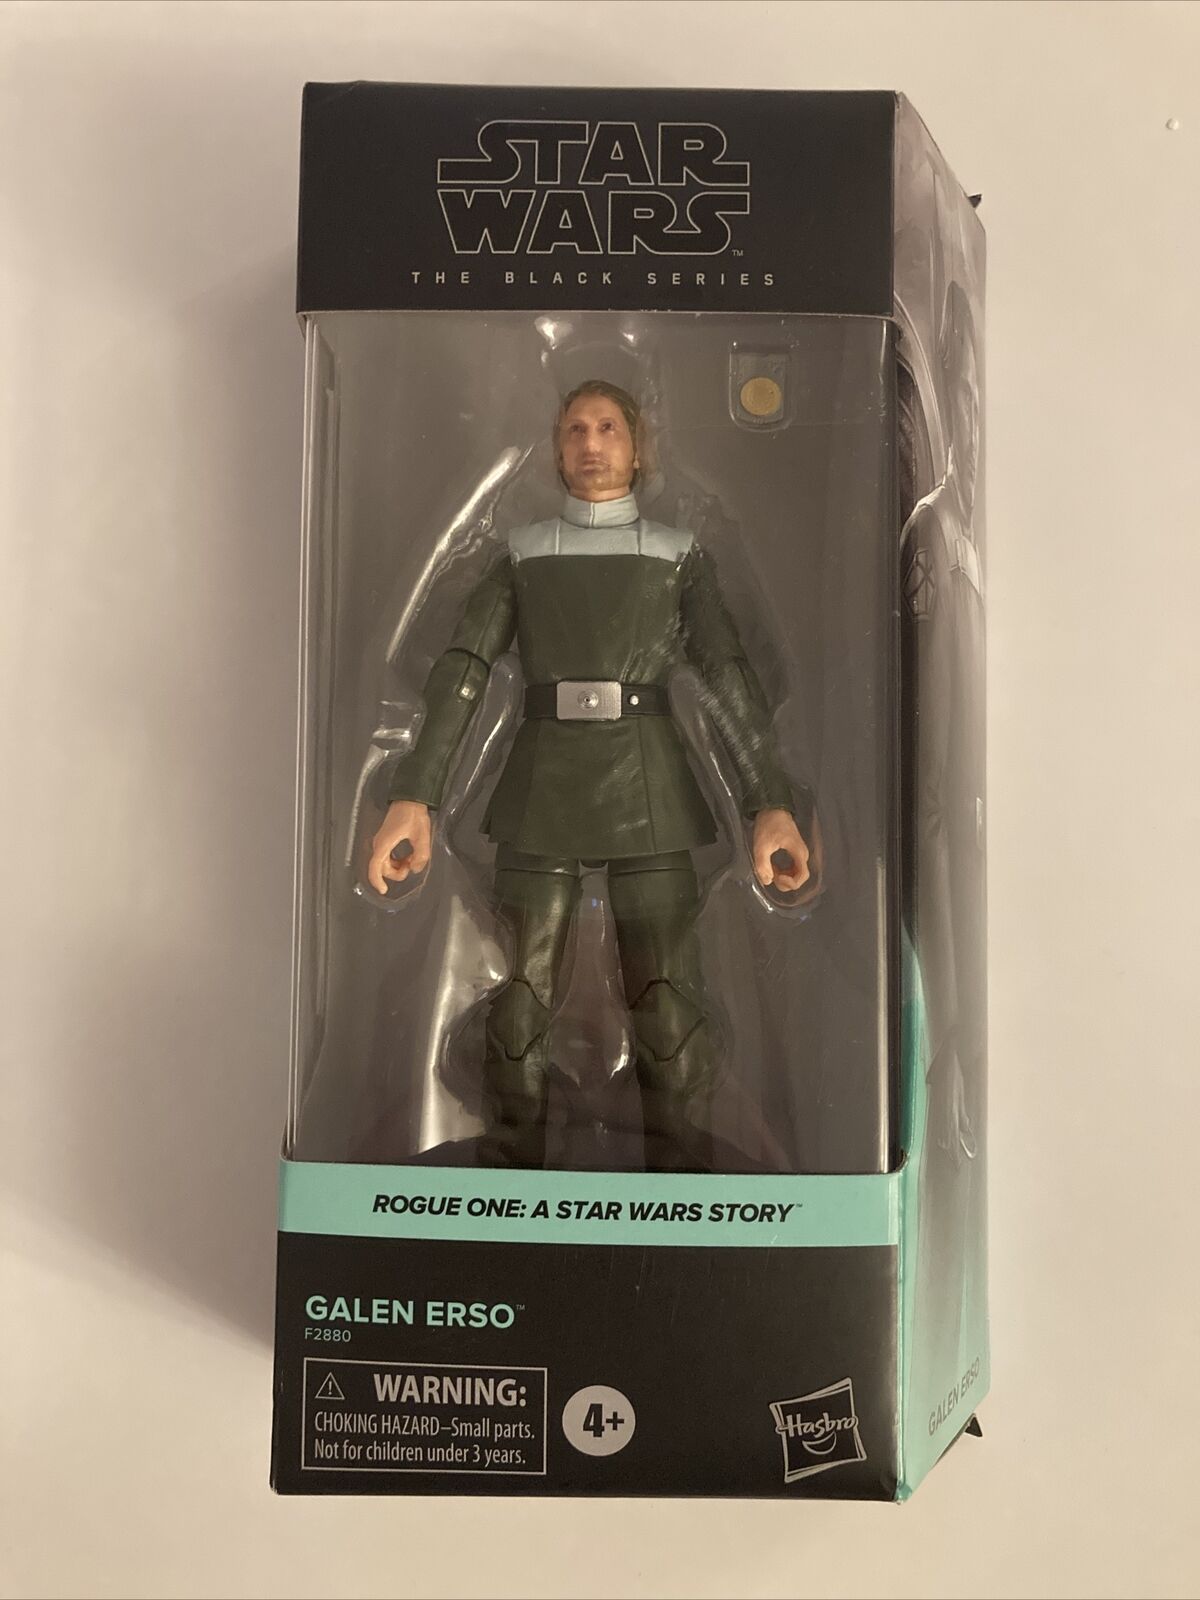 Star Wars Black Series 6" Rogue One Galen Erso with Death Star Plans by Hasbro